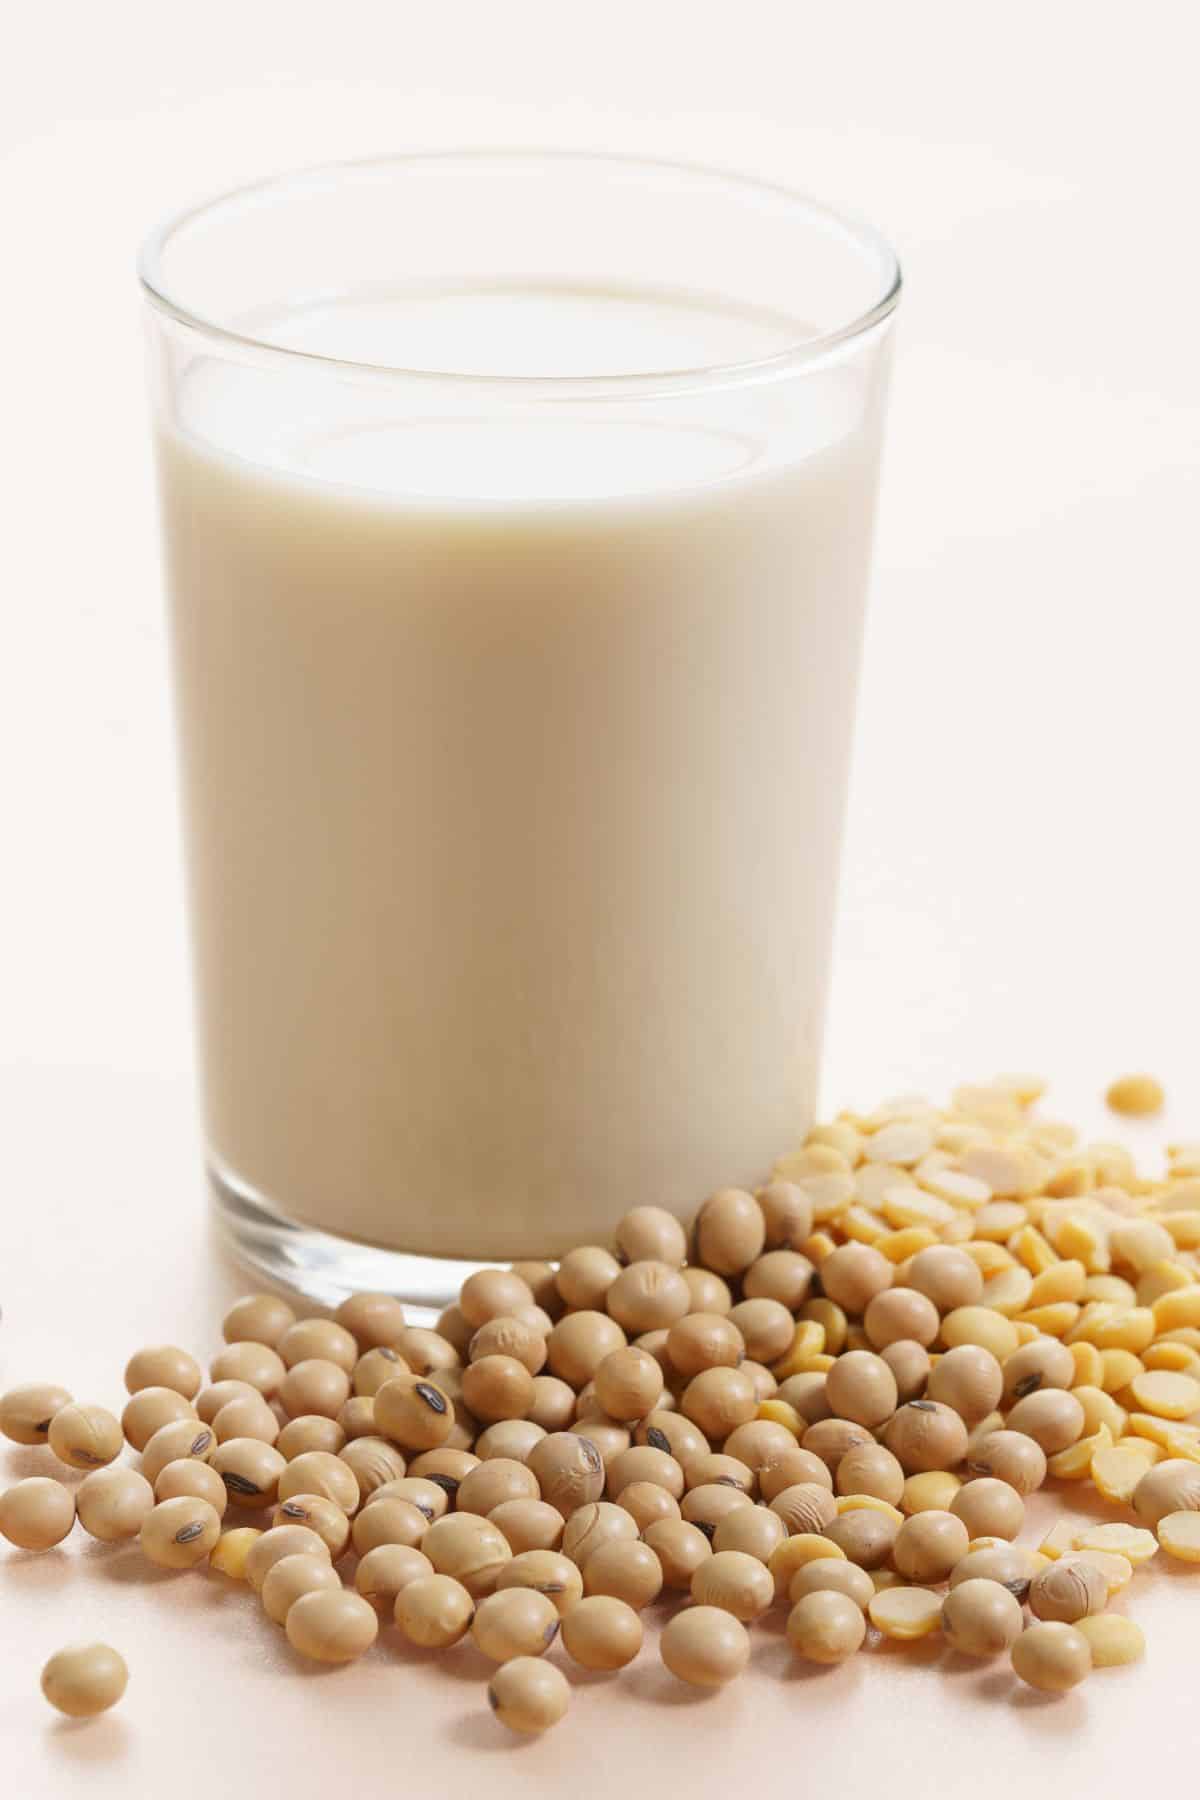 Cup of plant-based milk with dried soybeans on solid surface.